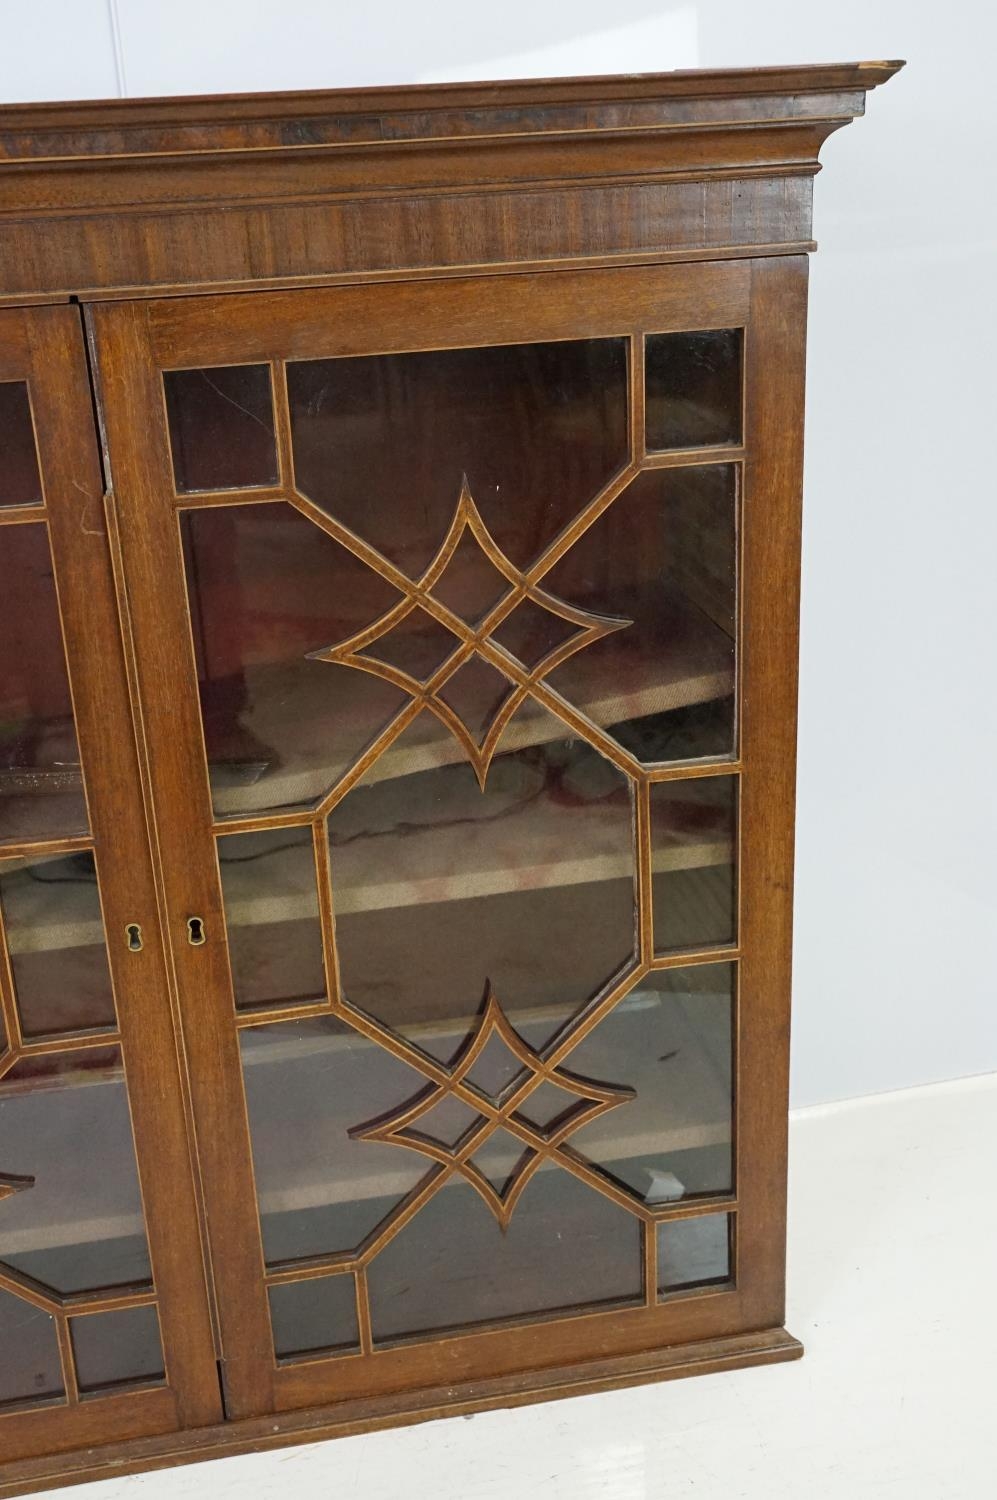 20th century mahogany astragal glazed two door display cabinet fitted with three shelves, 107cm high - Image 4 of 10